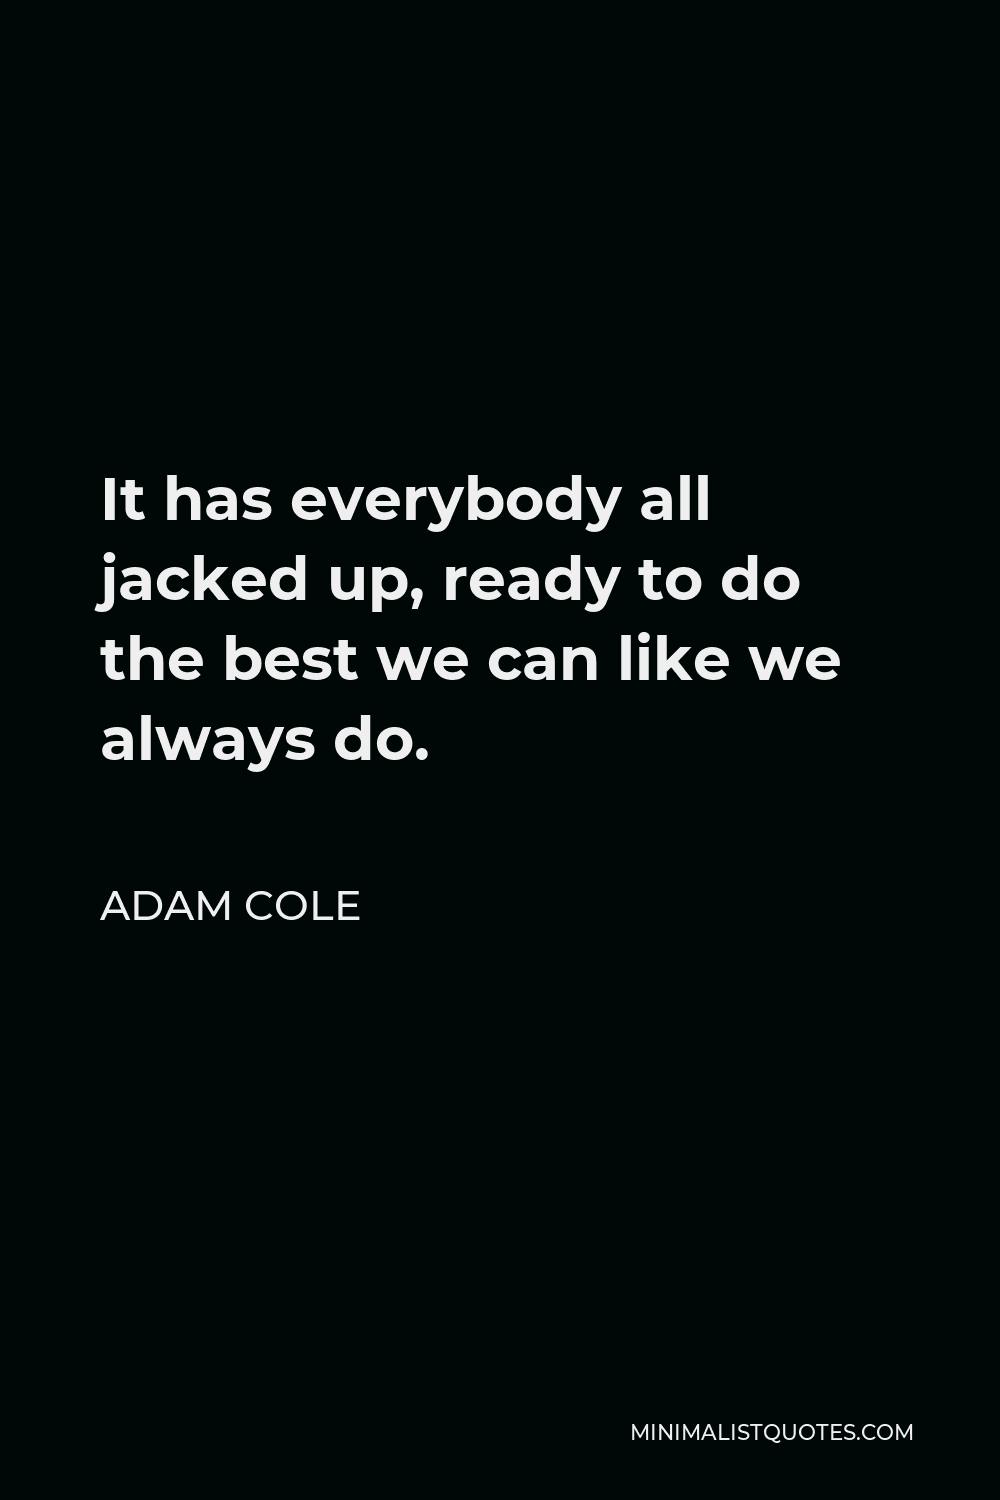 Adam Cole Quote - It has everybody all jacked up, ready to do the best we can like we always do.